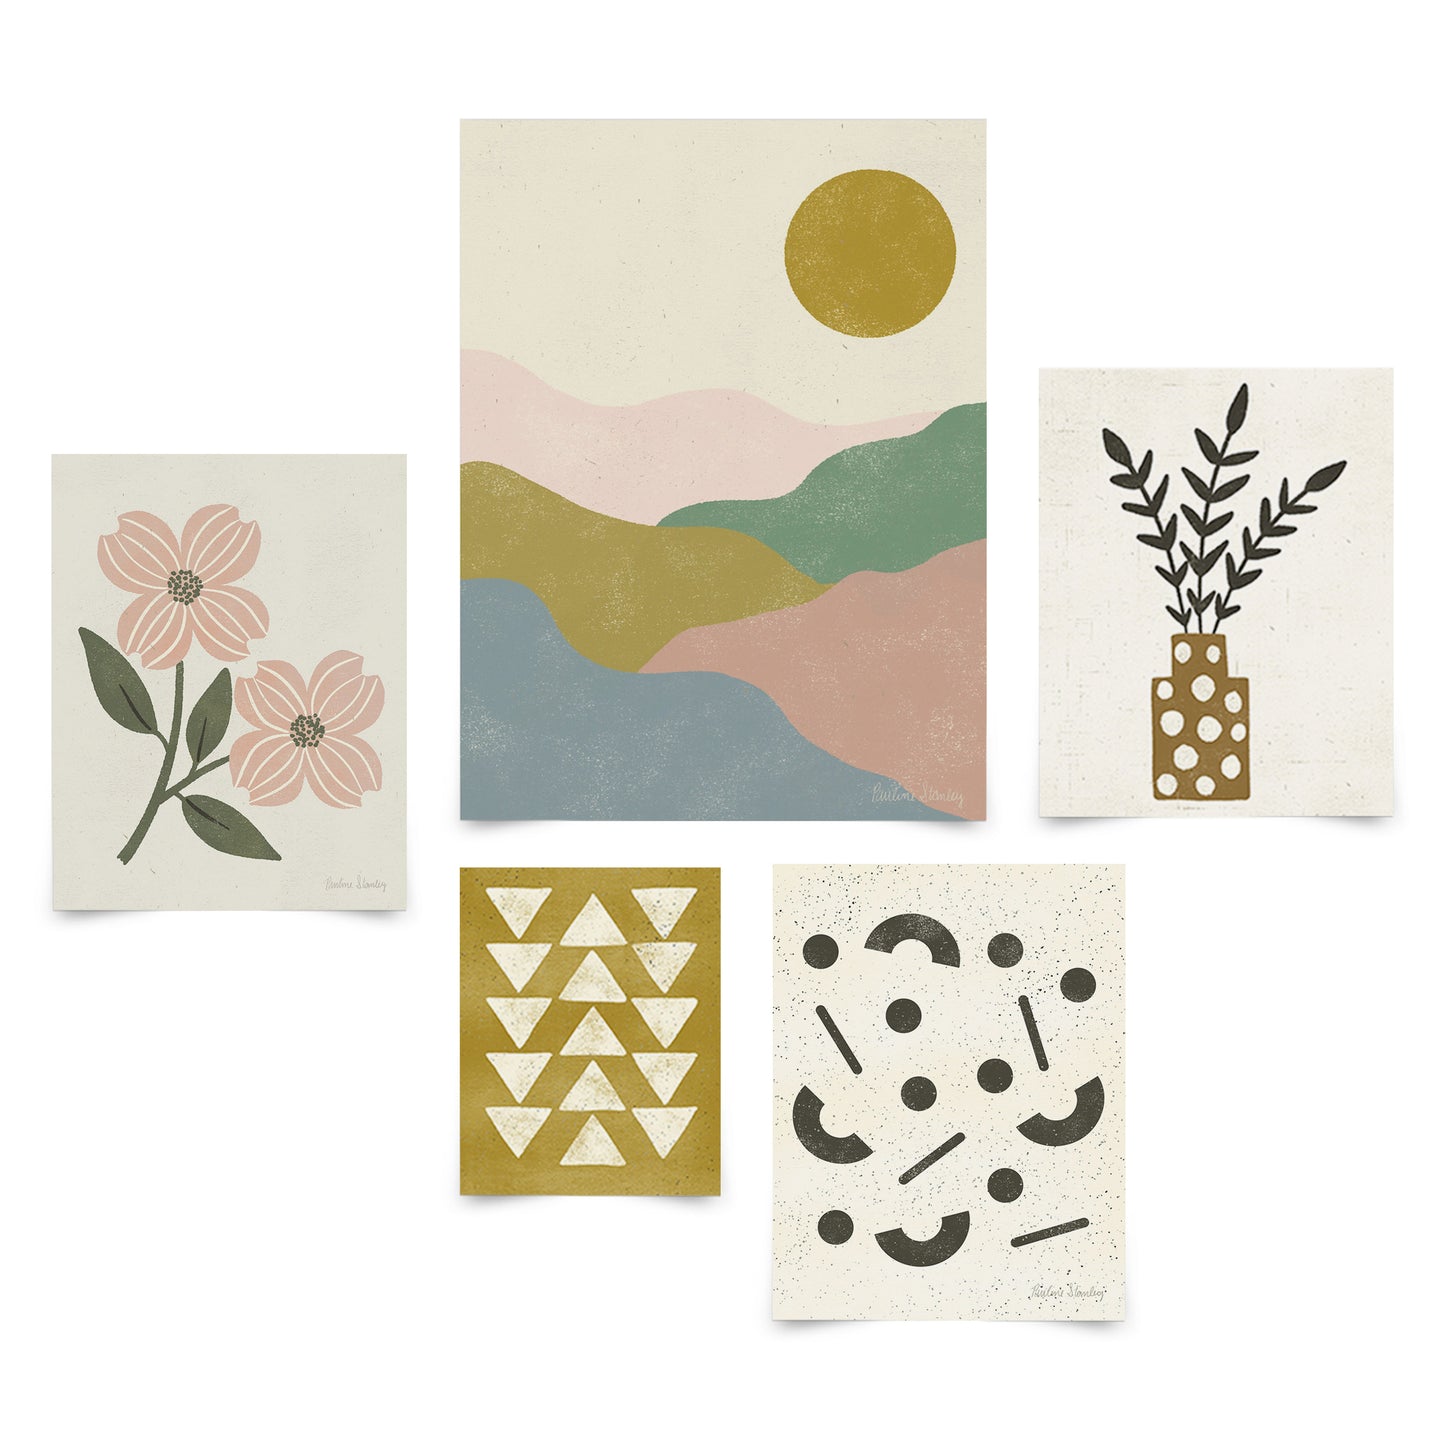 5 Piece Poster Gallery Wall Art Set - Pastel Pink & Green Botanical Abstract Landscape - Print